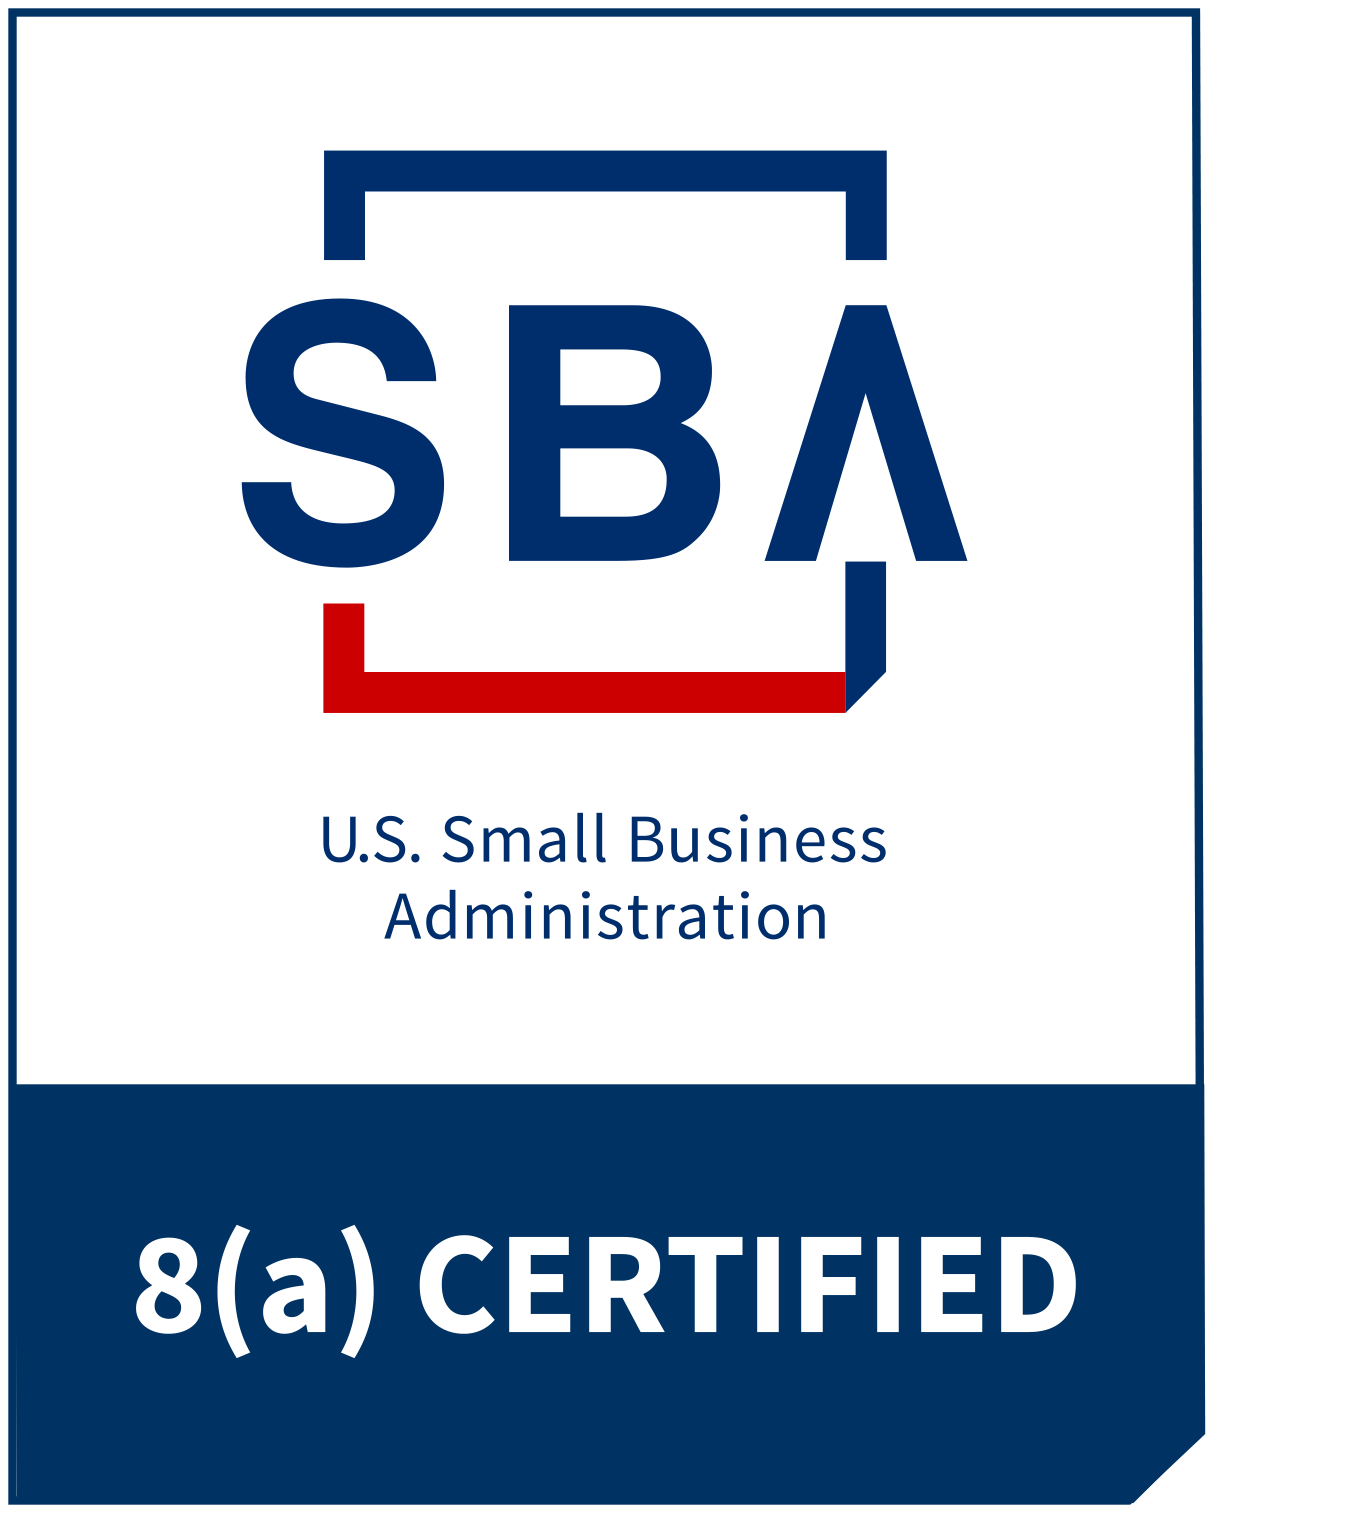 8(a) Certified through the United States Small Business Administration